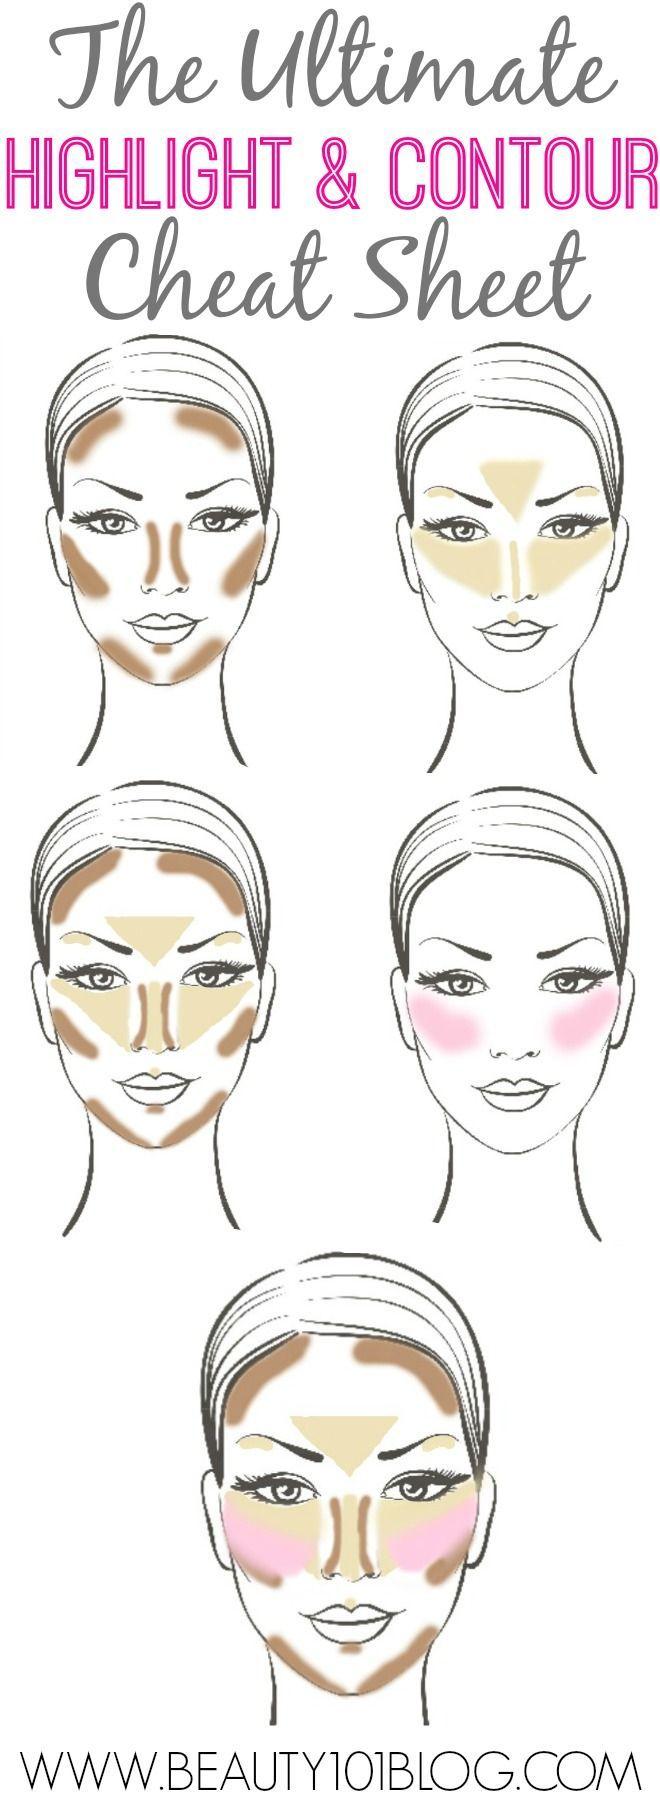 Wedding - The Ultimate Highlight & Contour Cheat Sheet!